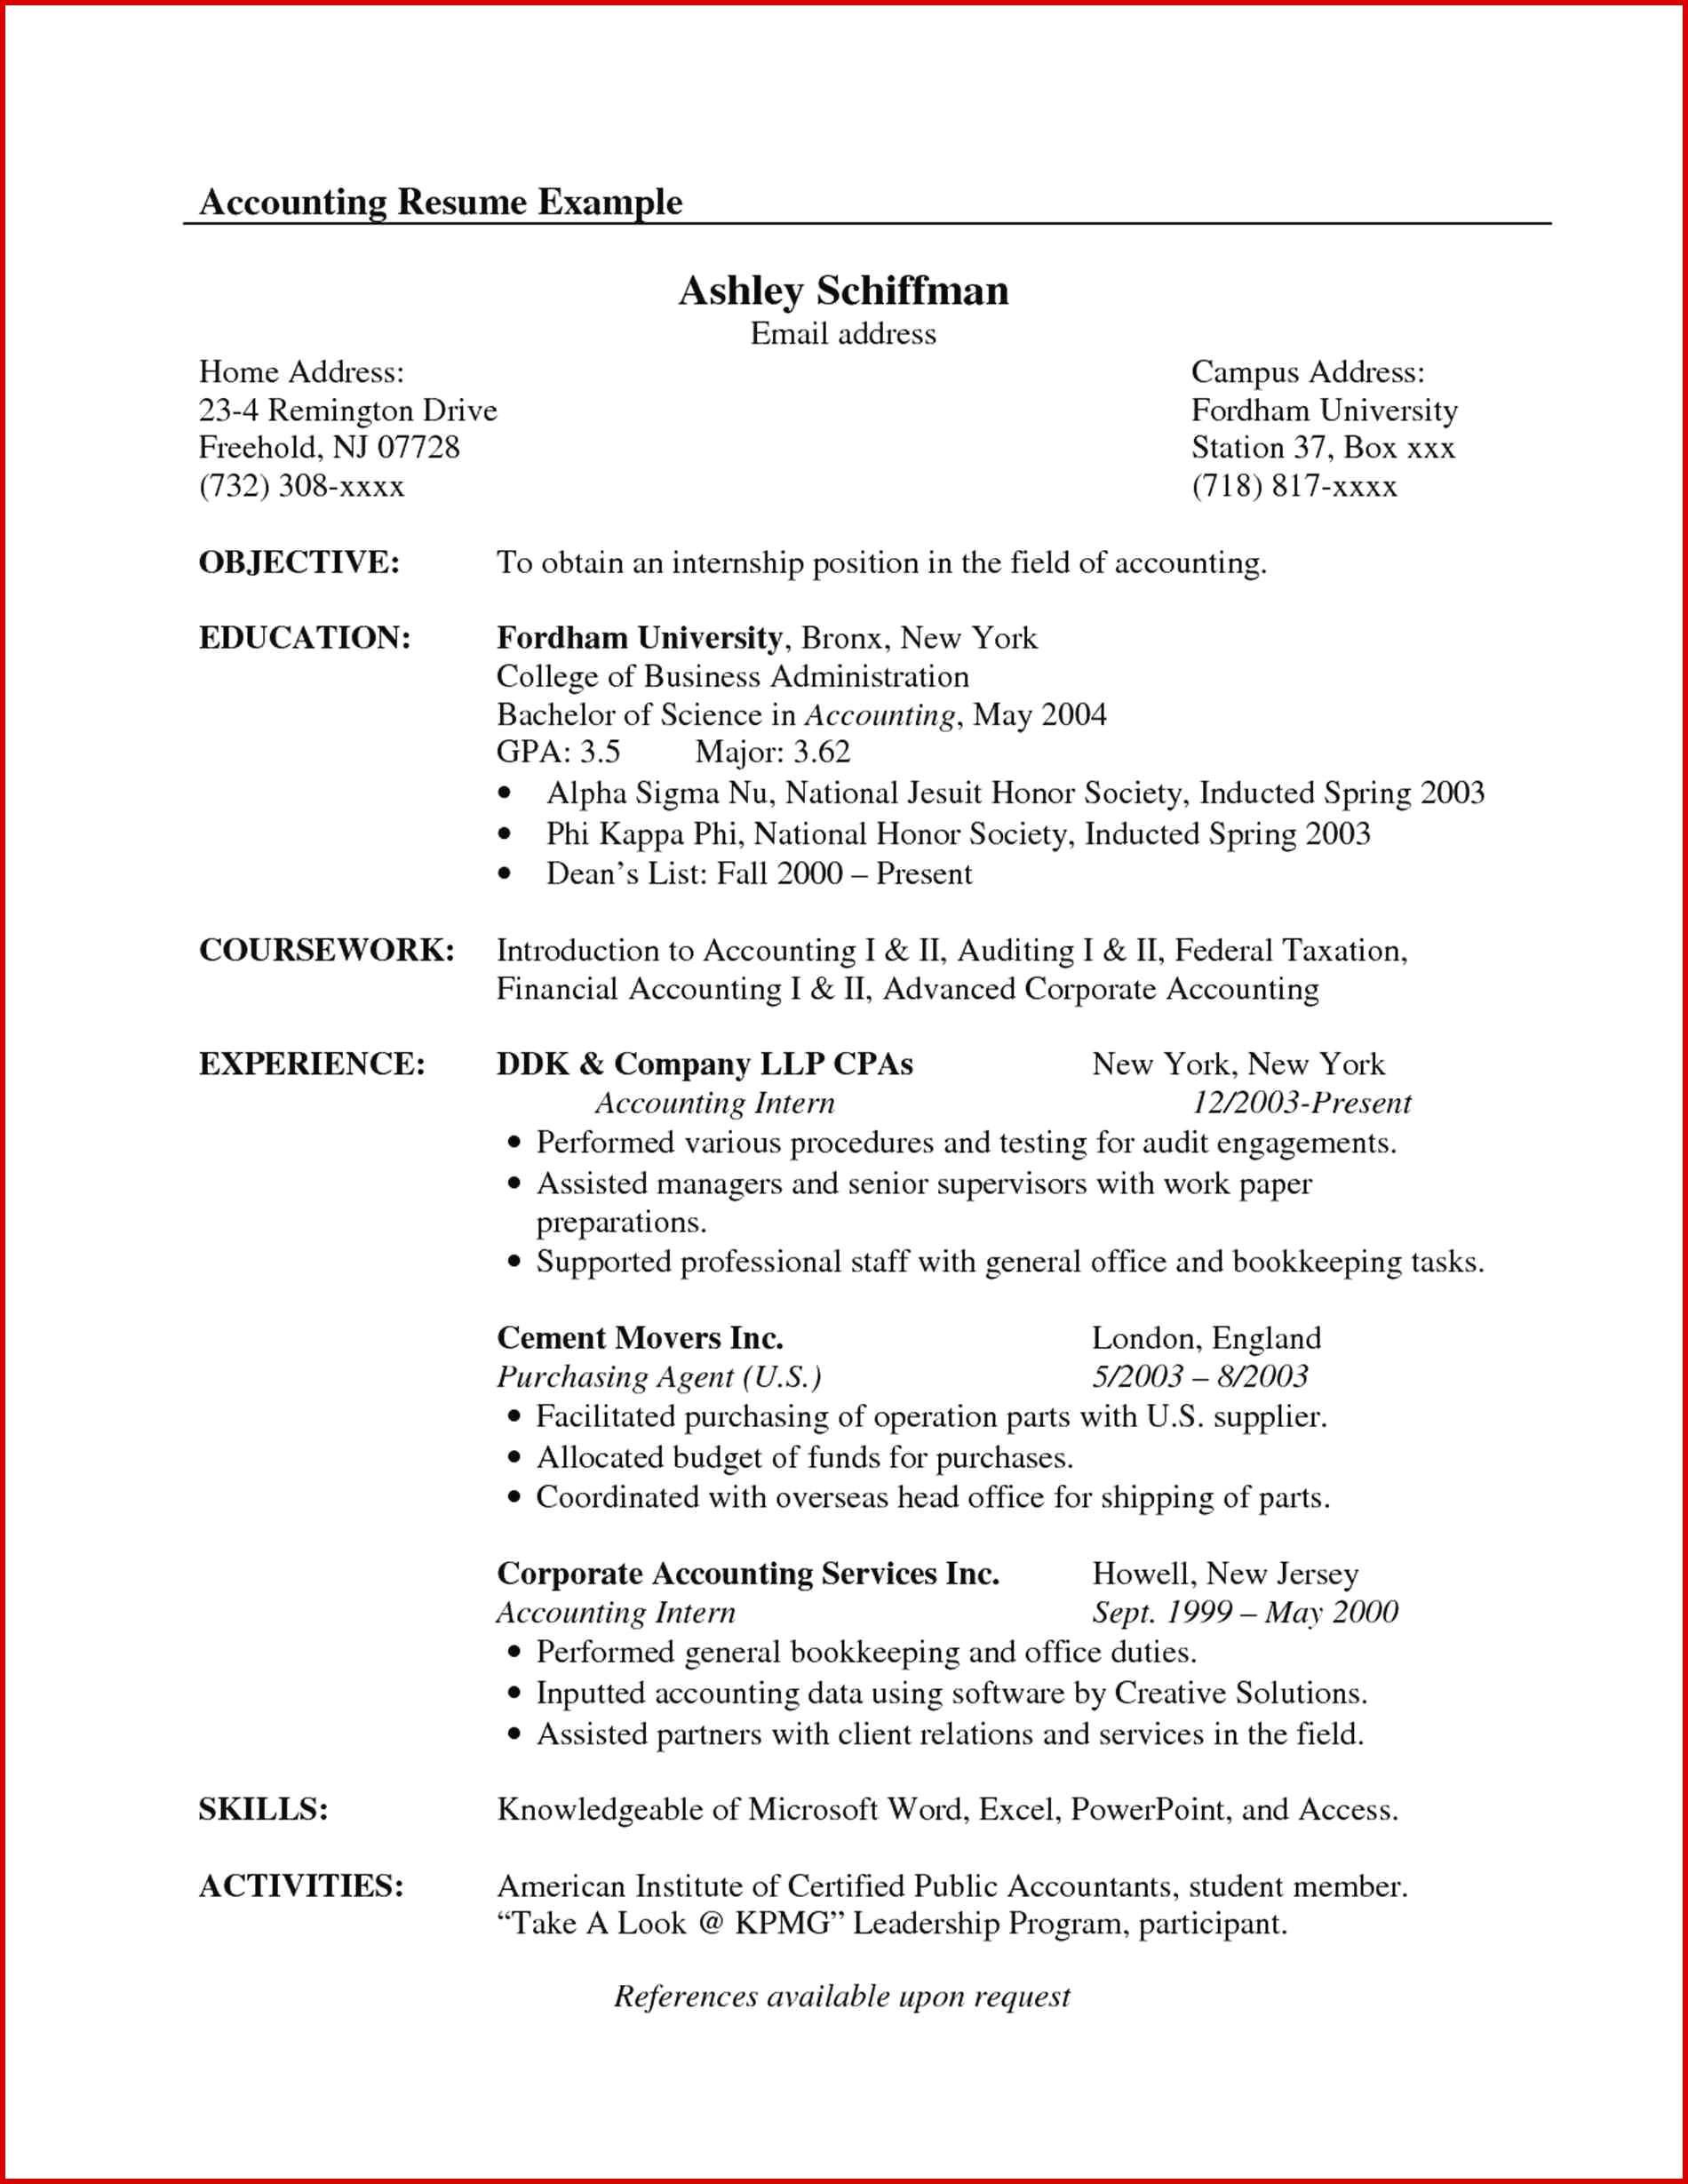 Internship Sample Resume for Accounting Students Career Objective Sample for Resume – Good Resume Examples